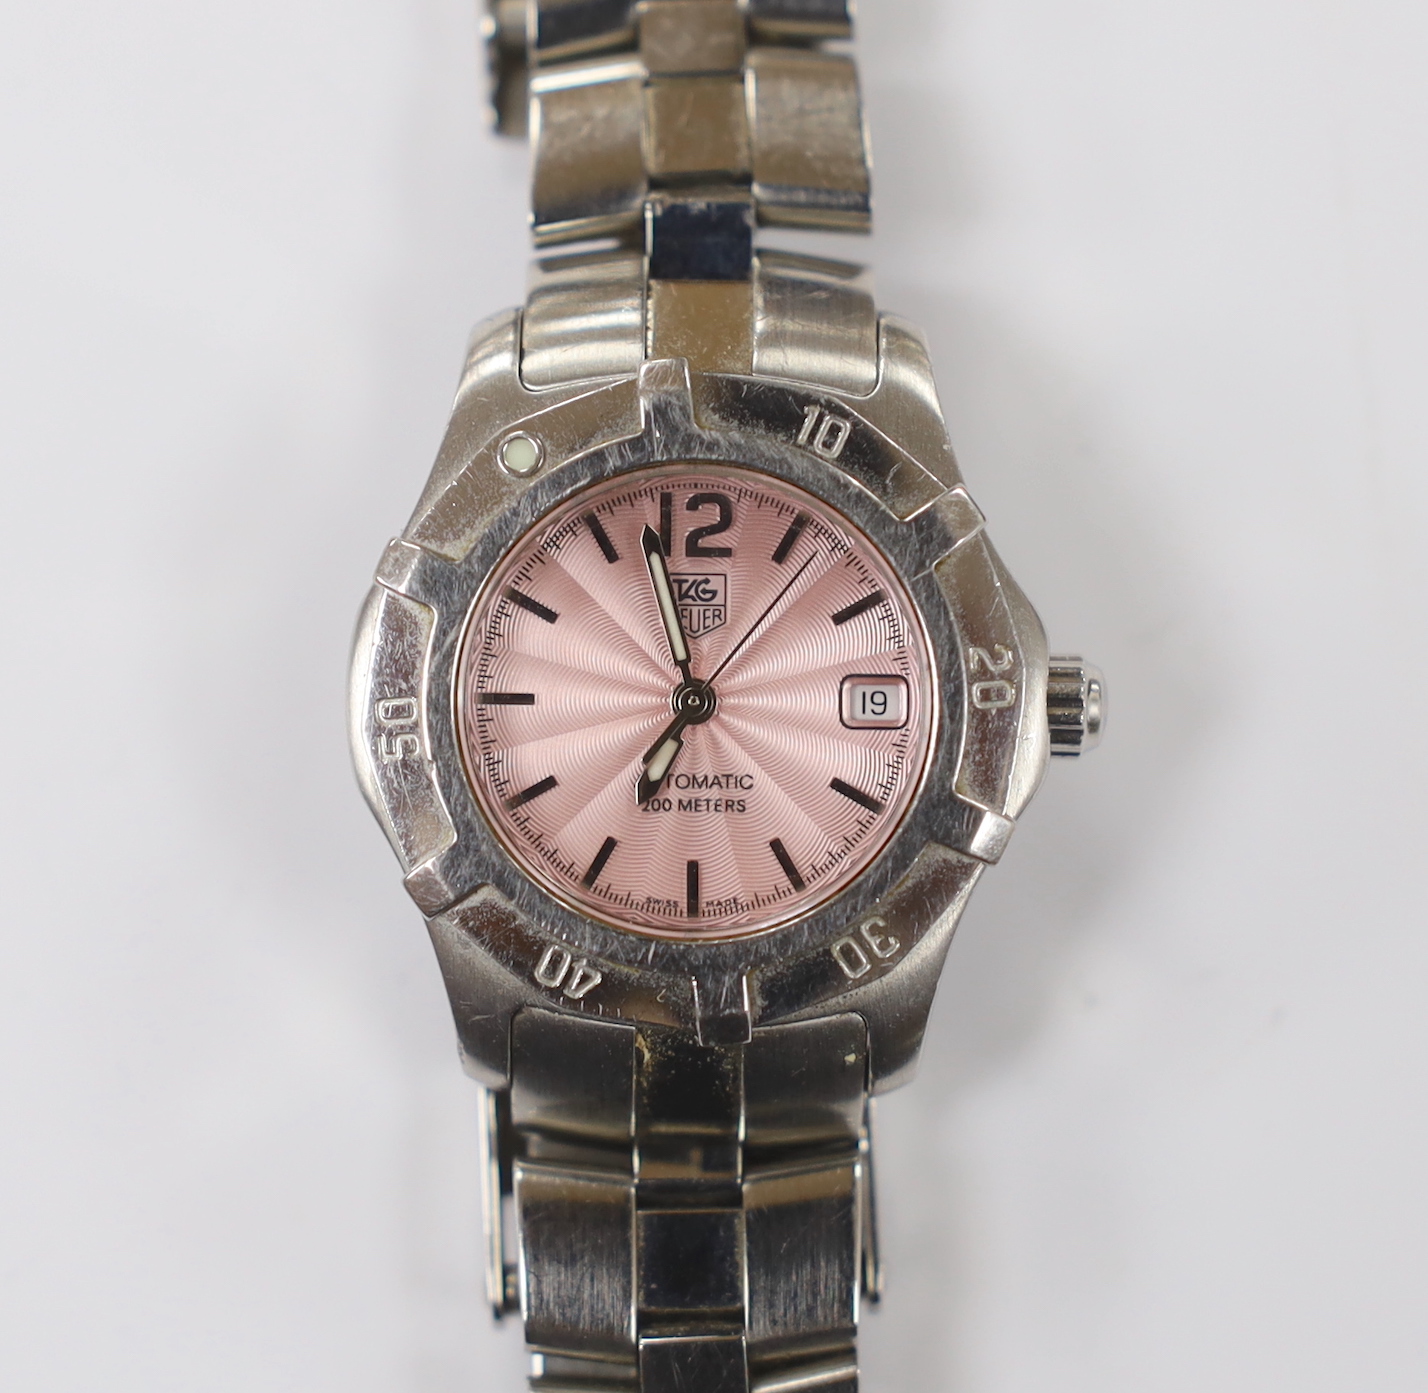 A lady's modern stainless steel Tag Heuer automatic wrist watch, with pink dial, on a Tag Heuer stainless steel bracelet. Condition - fair to poor